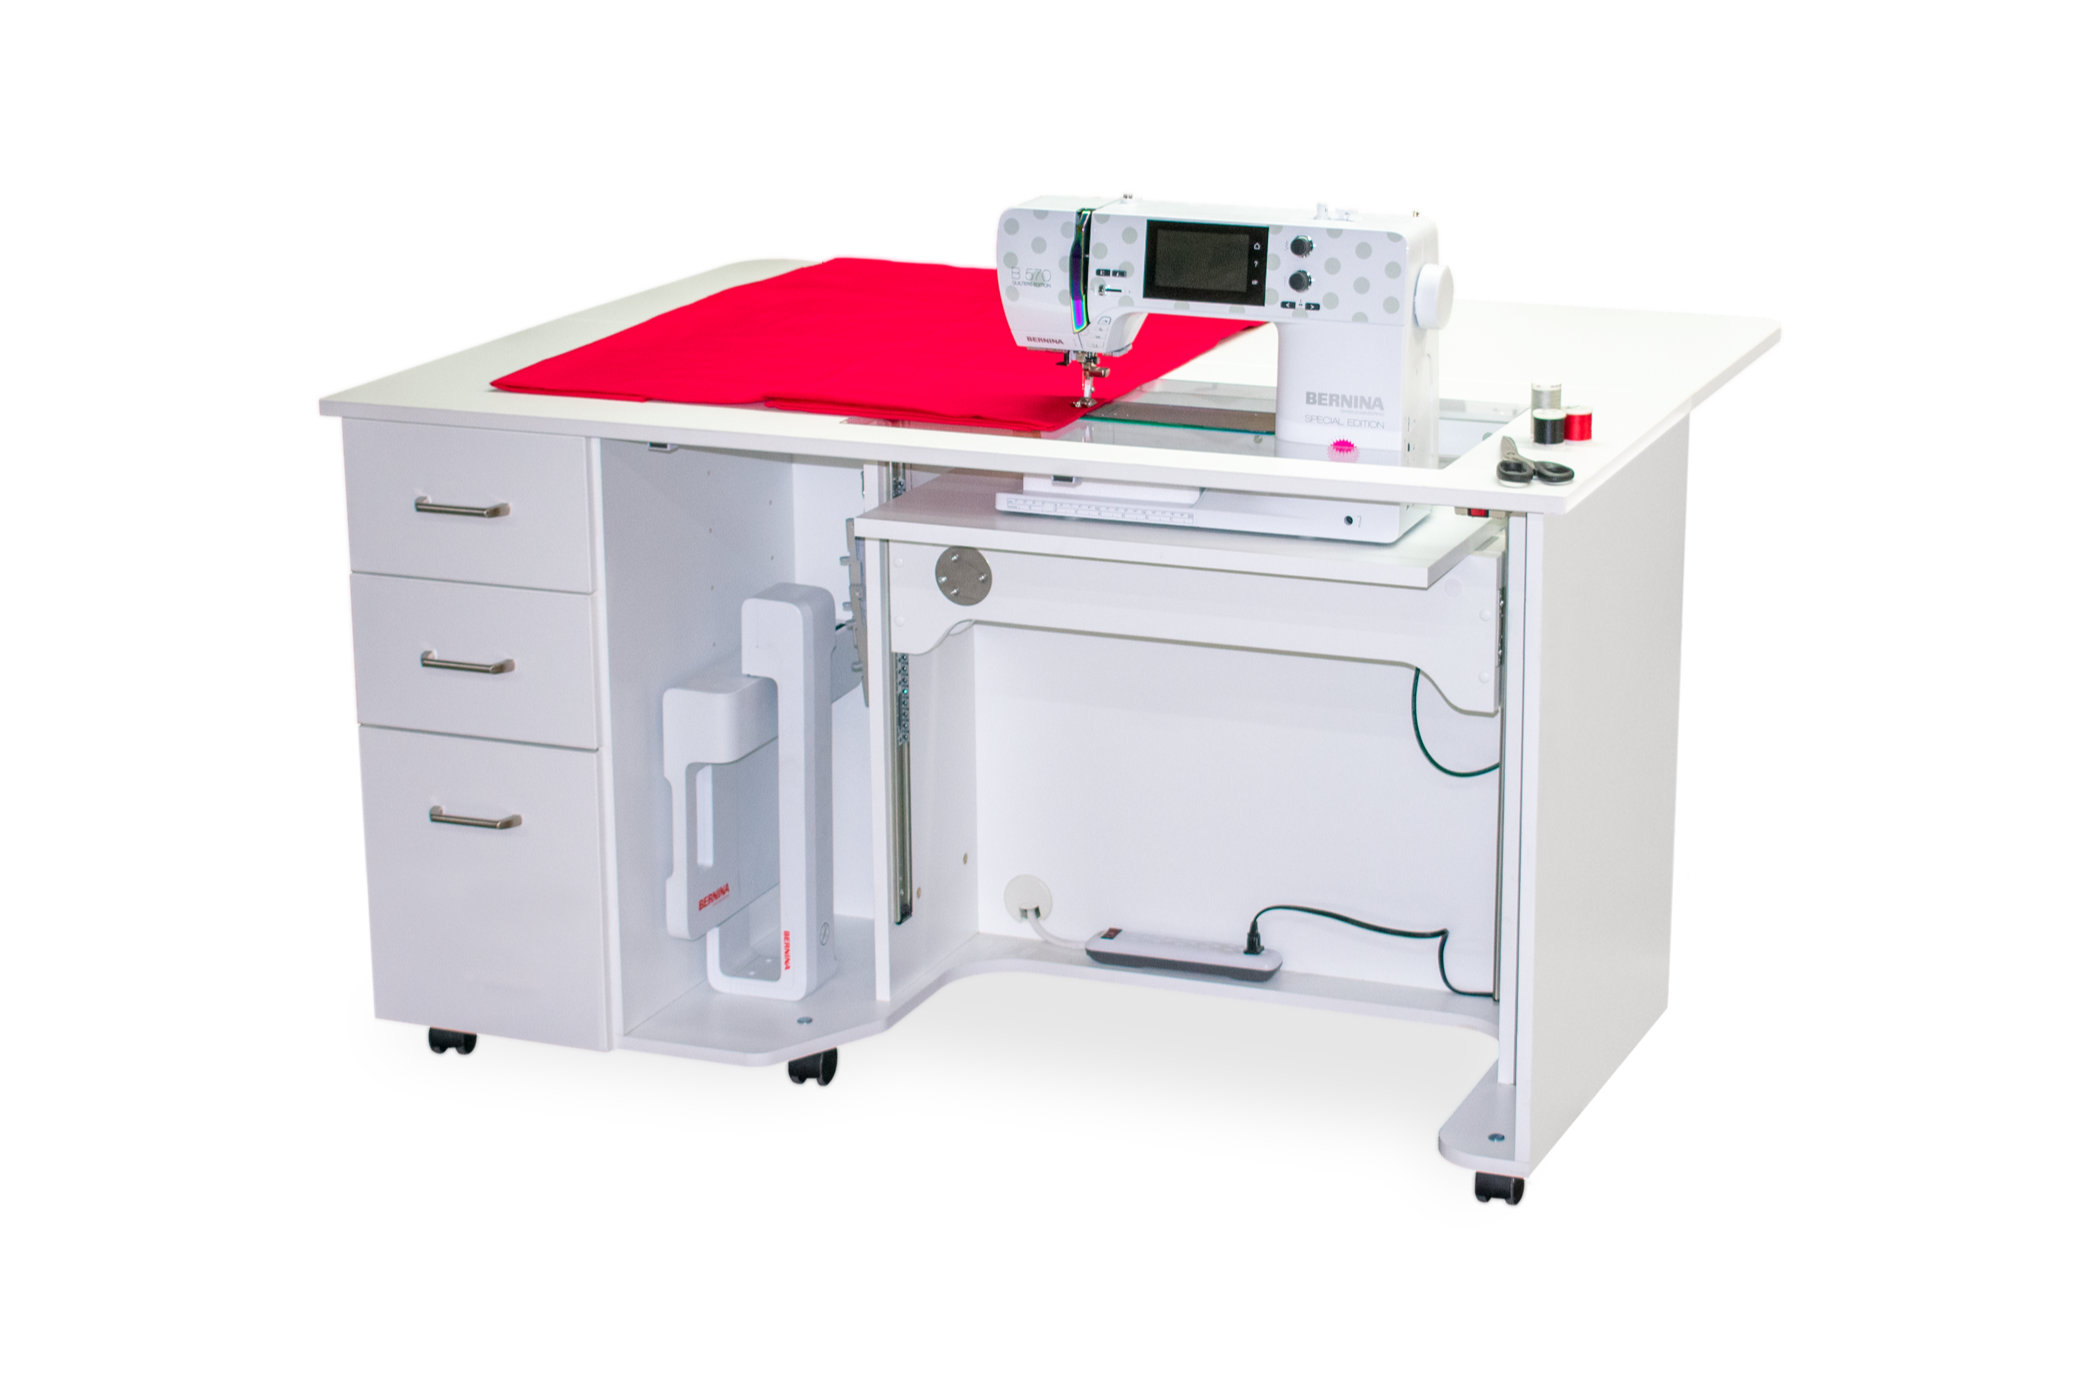 Cabinets for BERNINA sewing machines